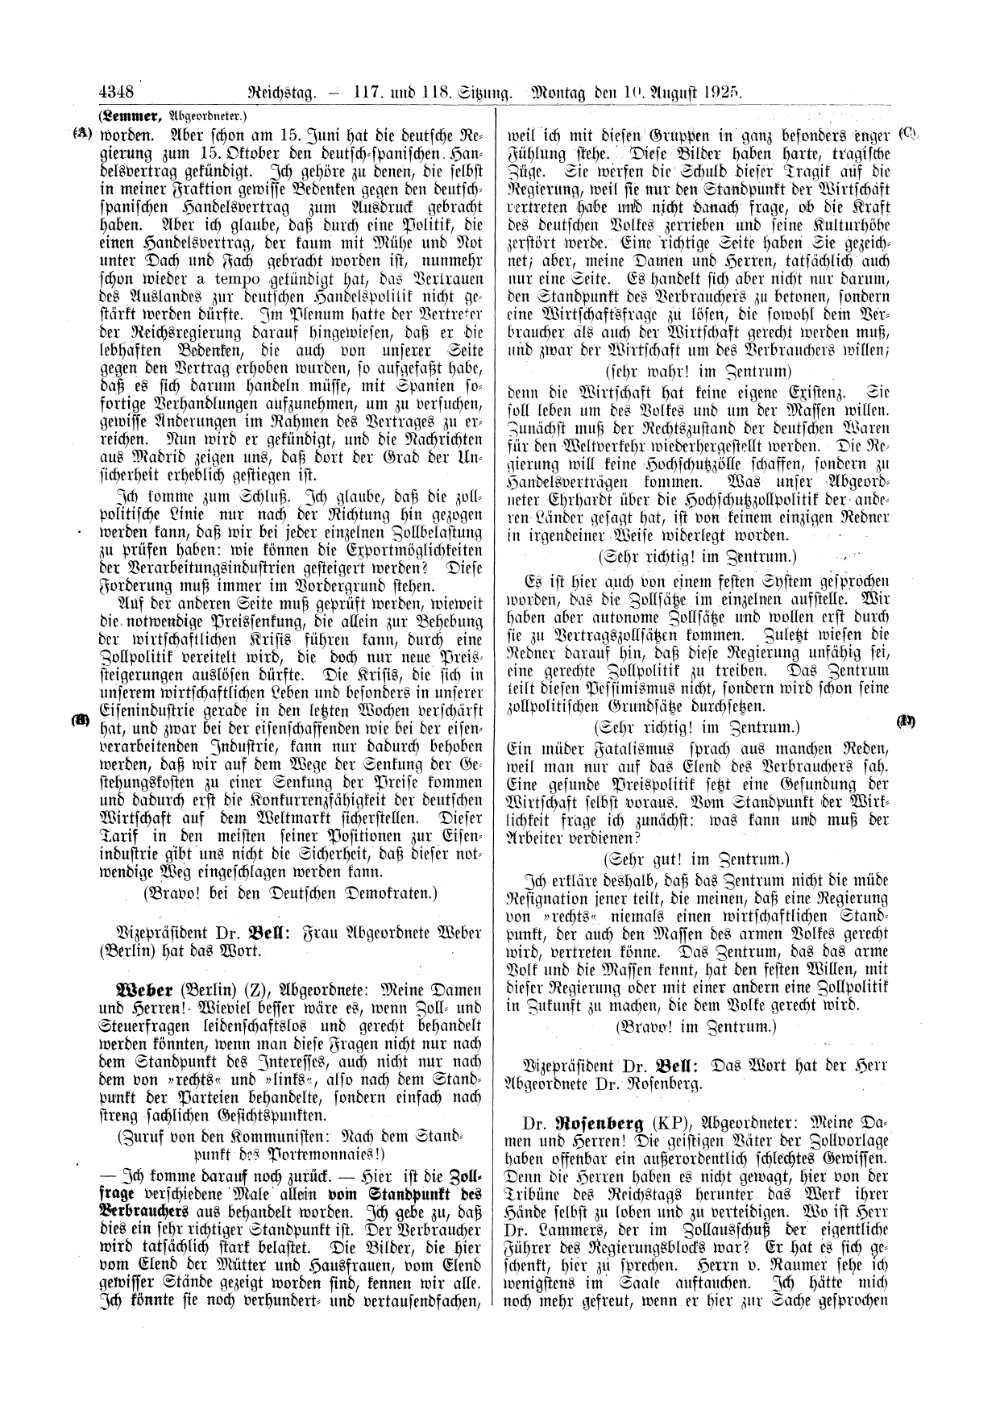 Scan of page 4348